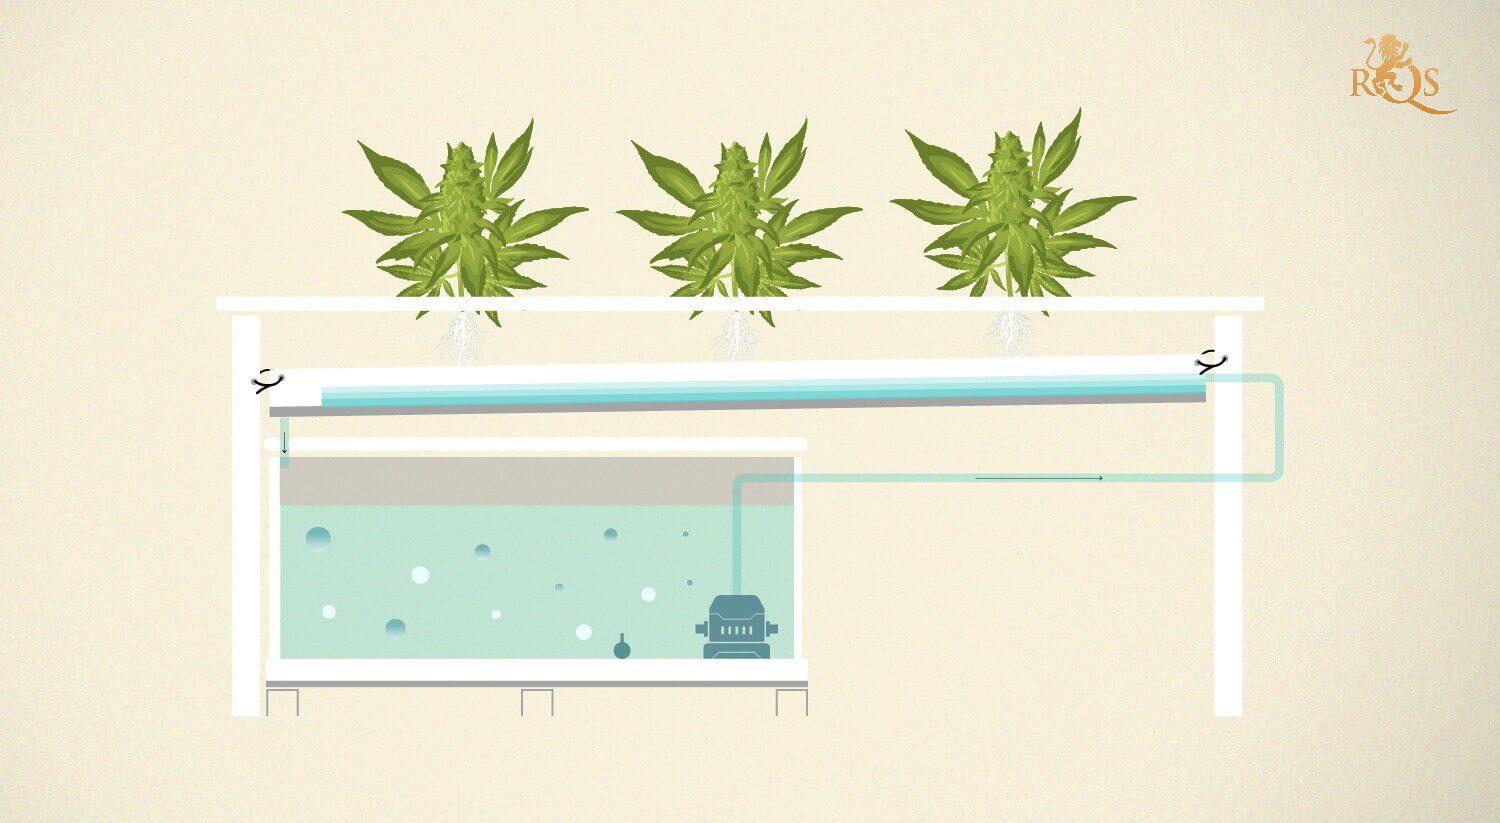 Step 5: Watch your plants grow!